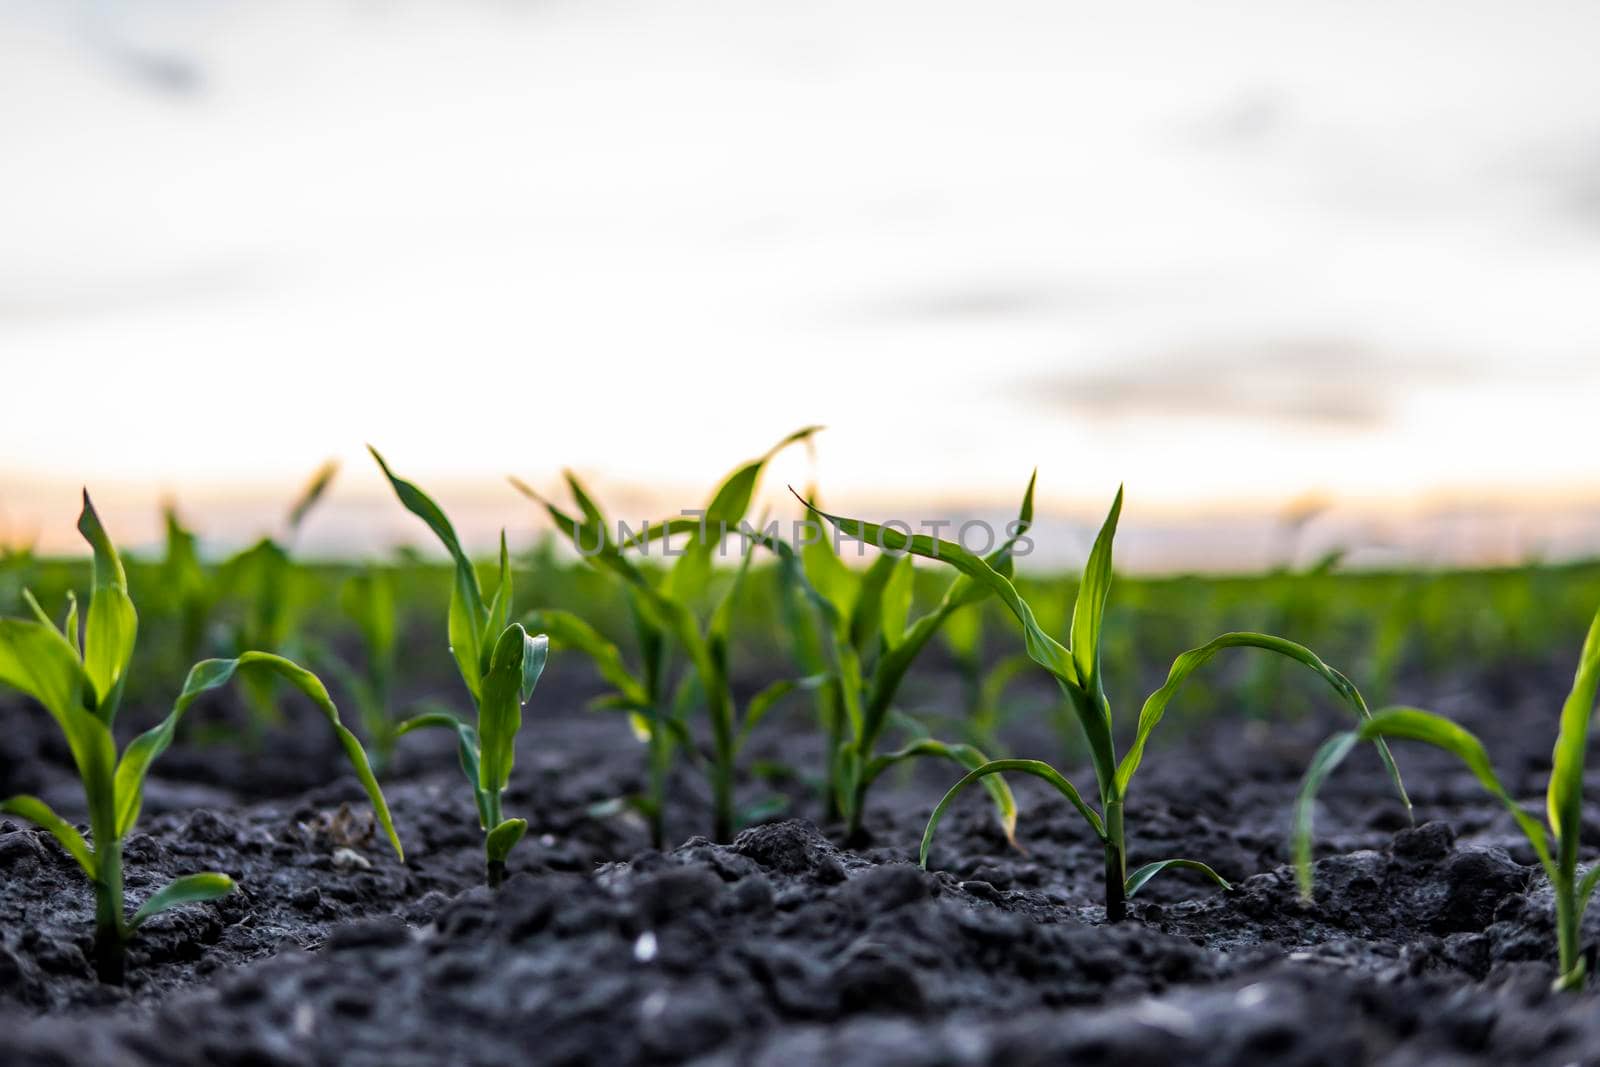 Young corn sprouts on agricultural field close up. Growing corn seedling sprouts on cultivated agricultural farm field under the sunset